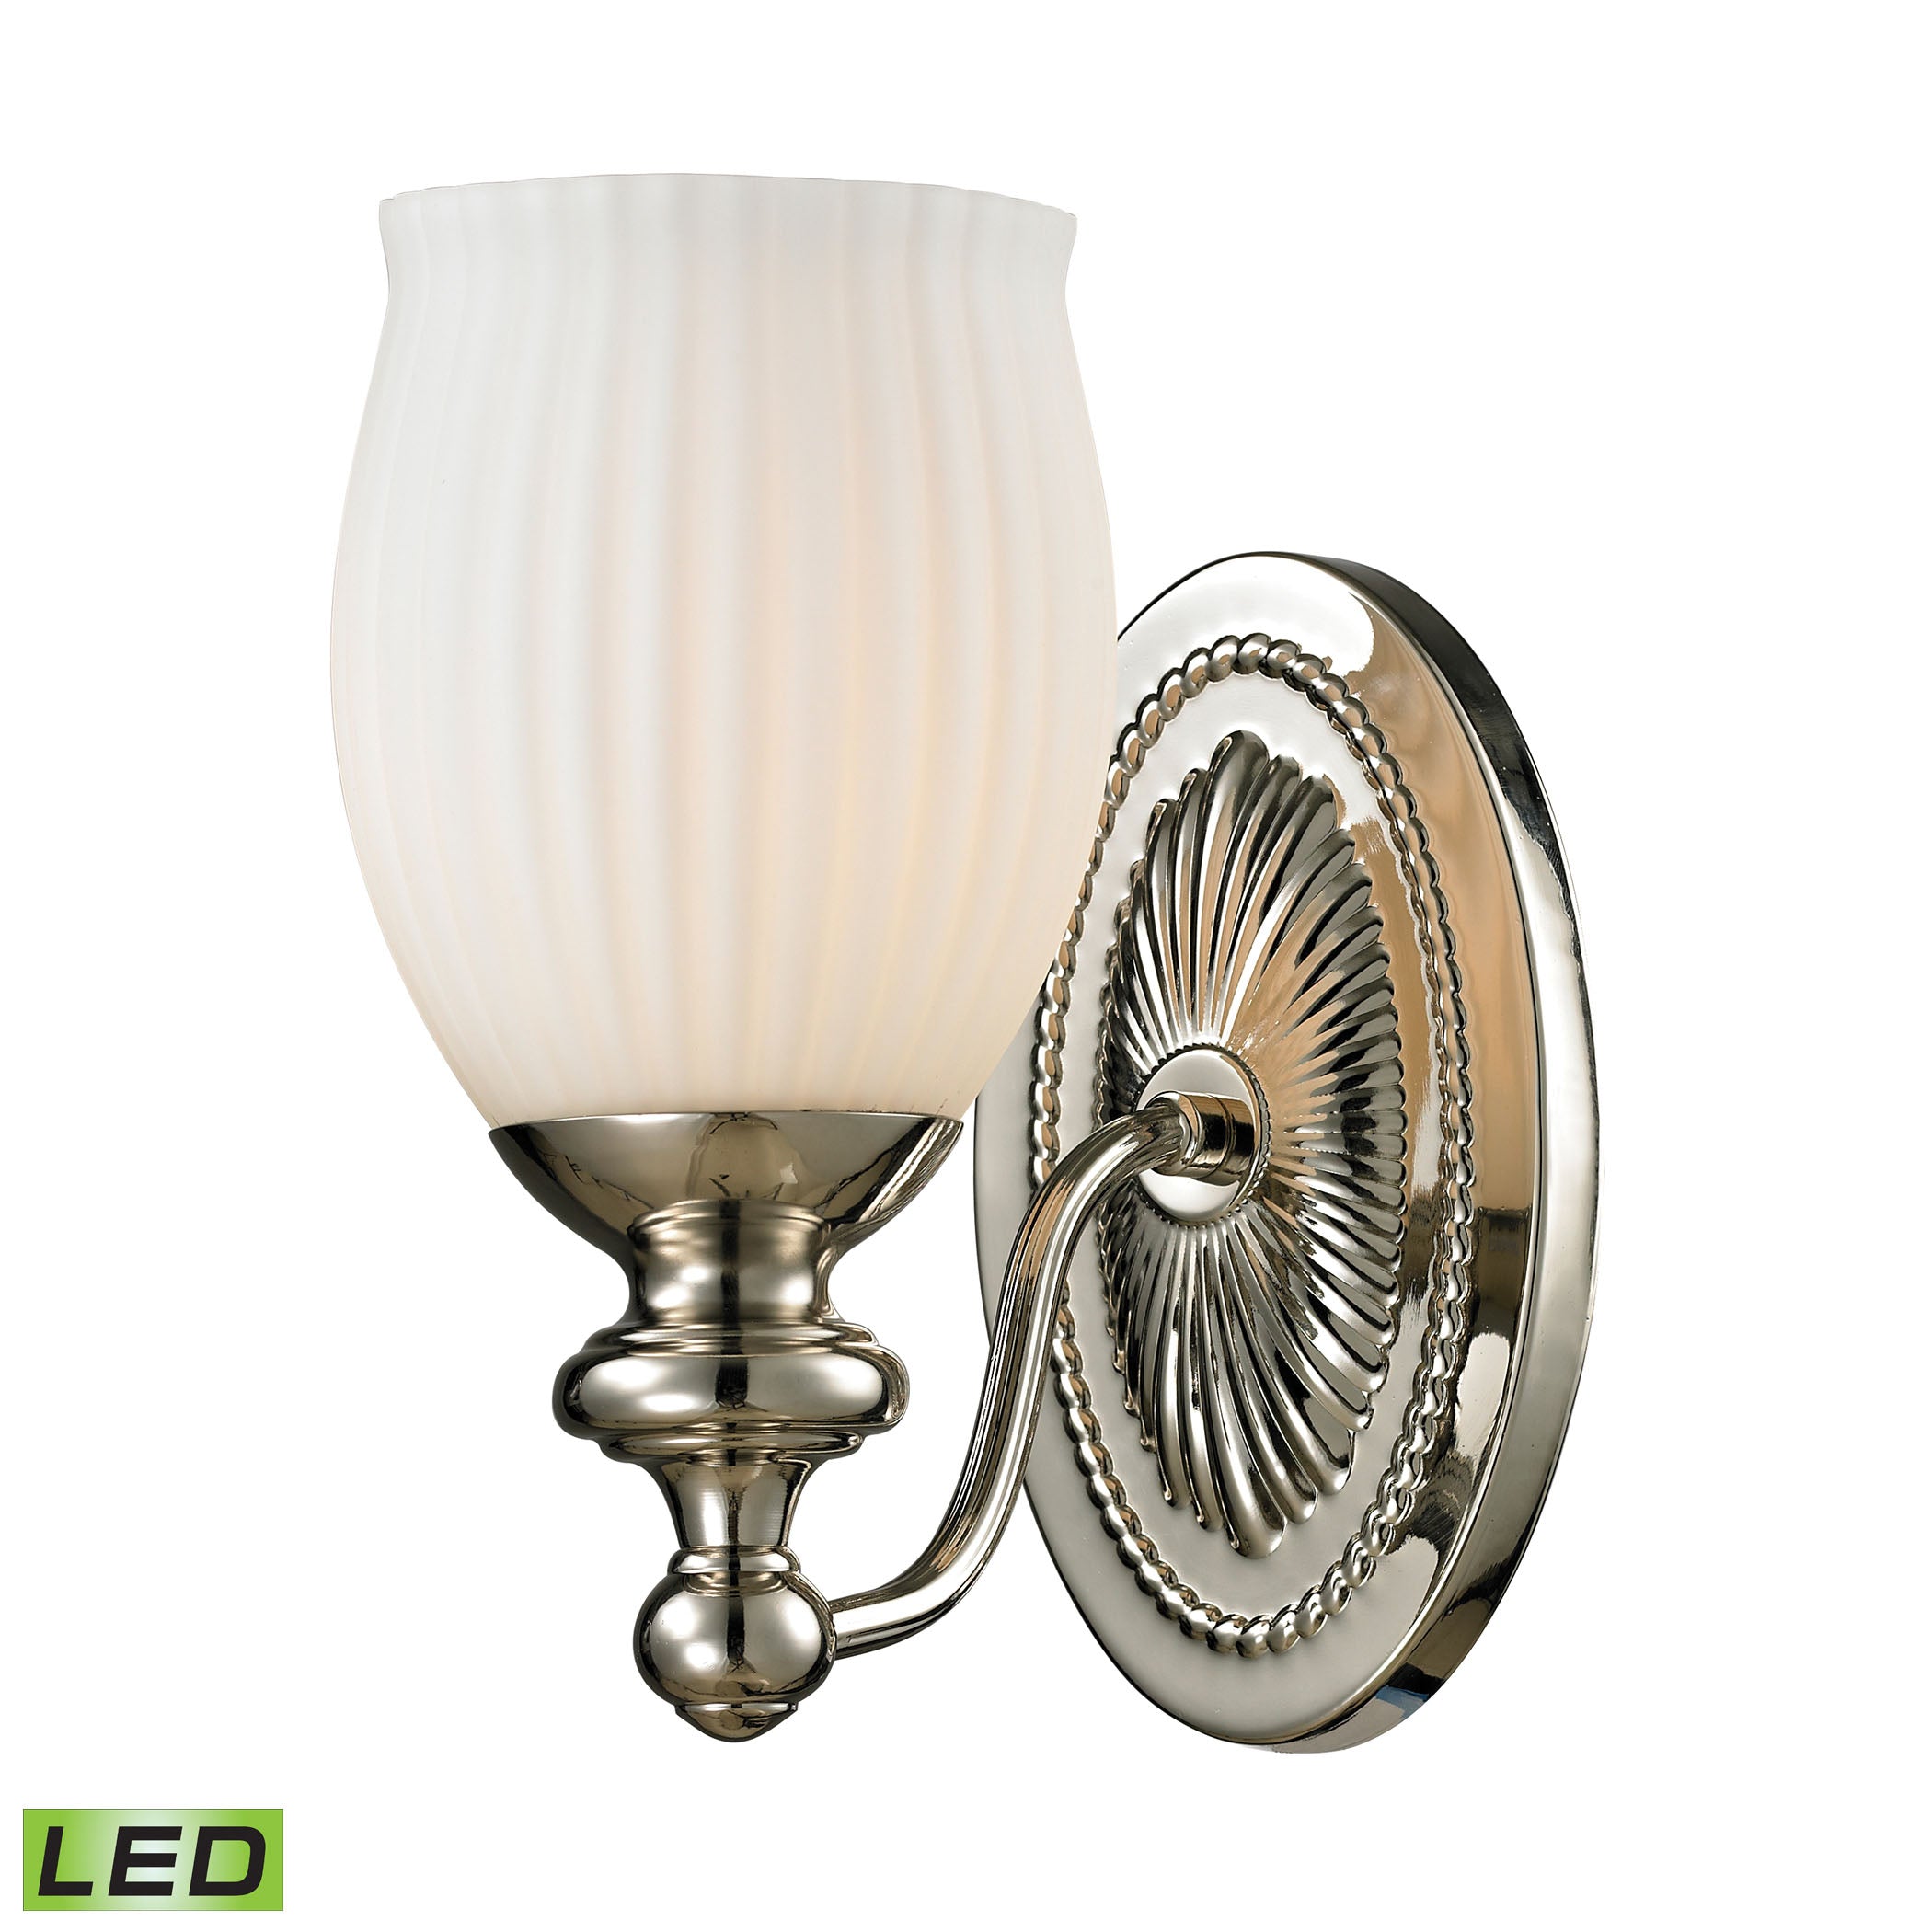 ELK Lighting 11640/1-LED Park Ridge 1-Light Vanity Lamp in Polished Nickel with Reeded Opal Glass - Includes LED Bulb